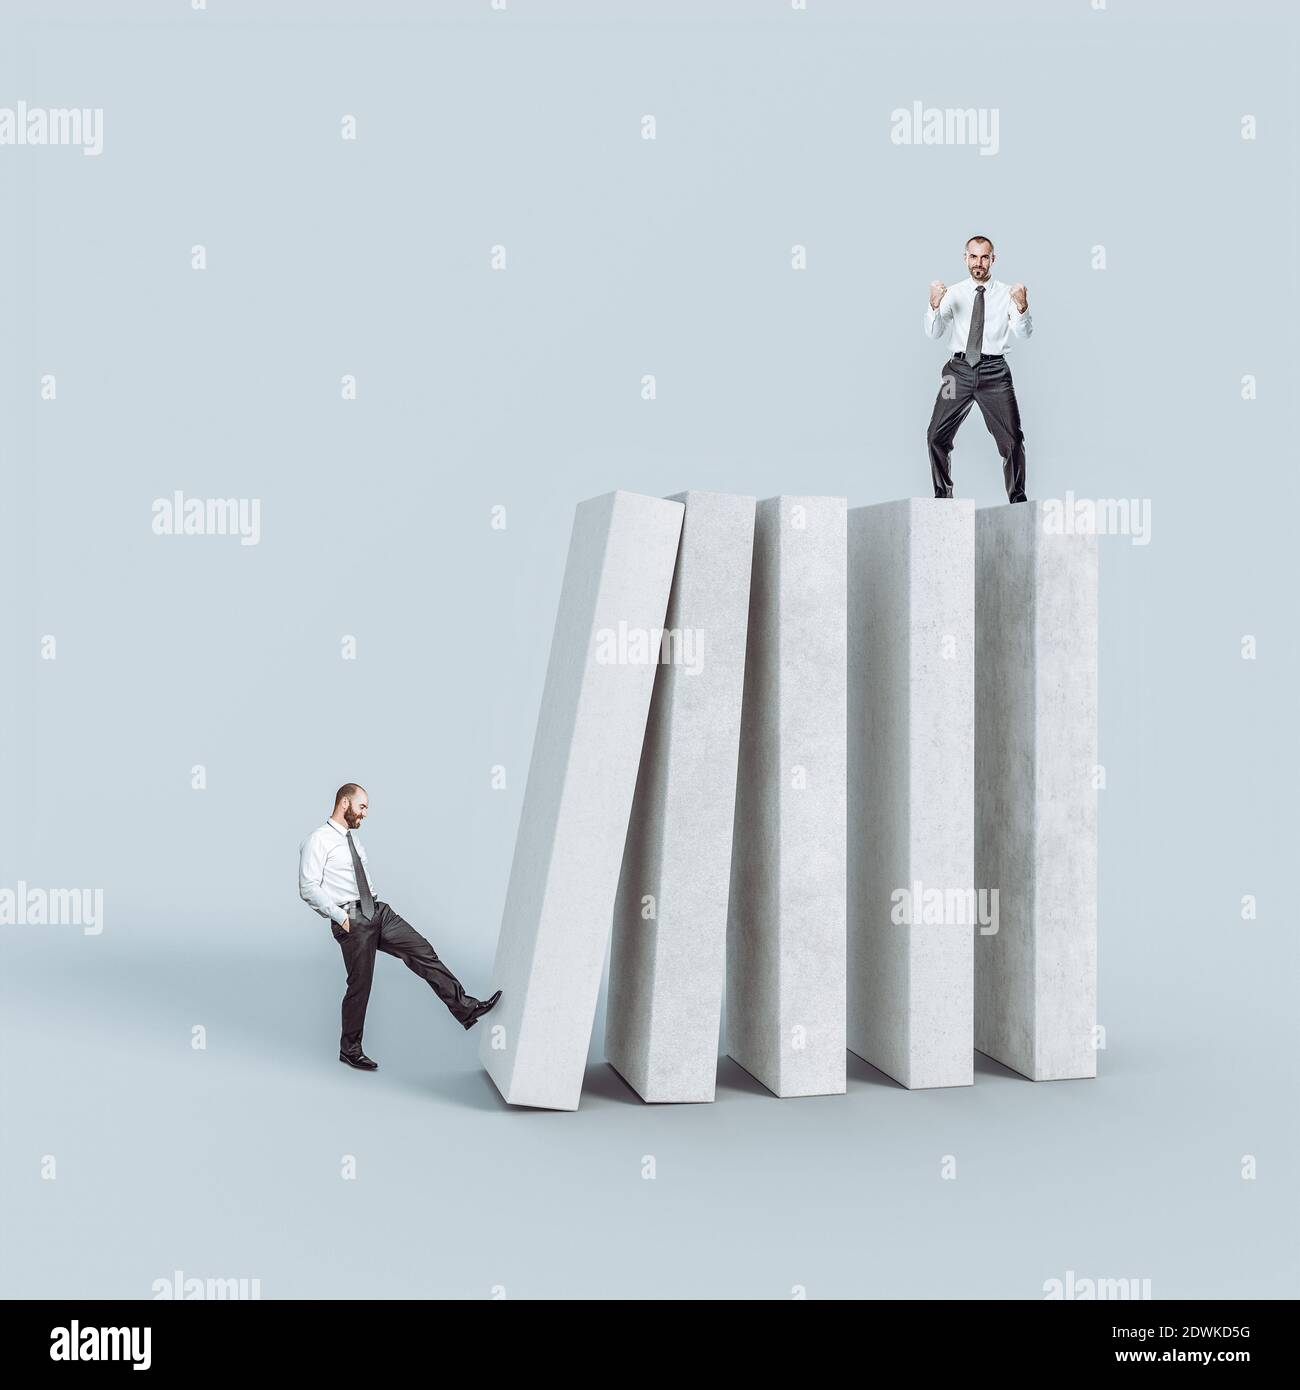 man tries to drop his colleague from the blocks. concept of dissatisfaction, envy, unfair competition. Stock Photo